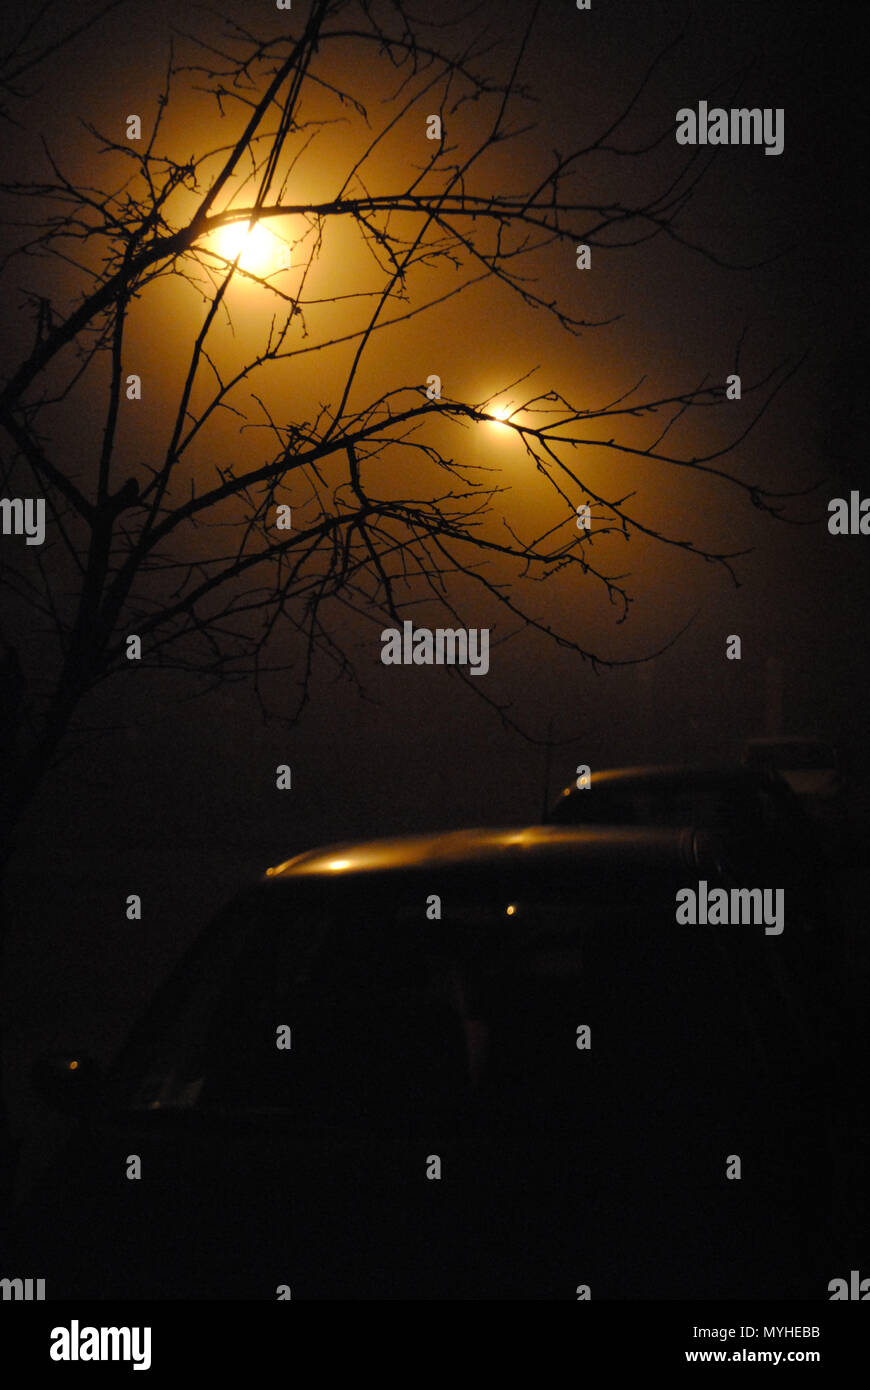 Misty and spooky street scene at night in the city. Stock Photo